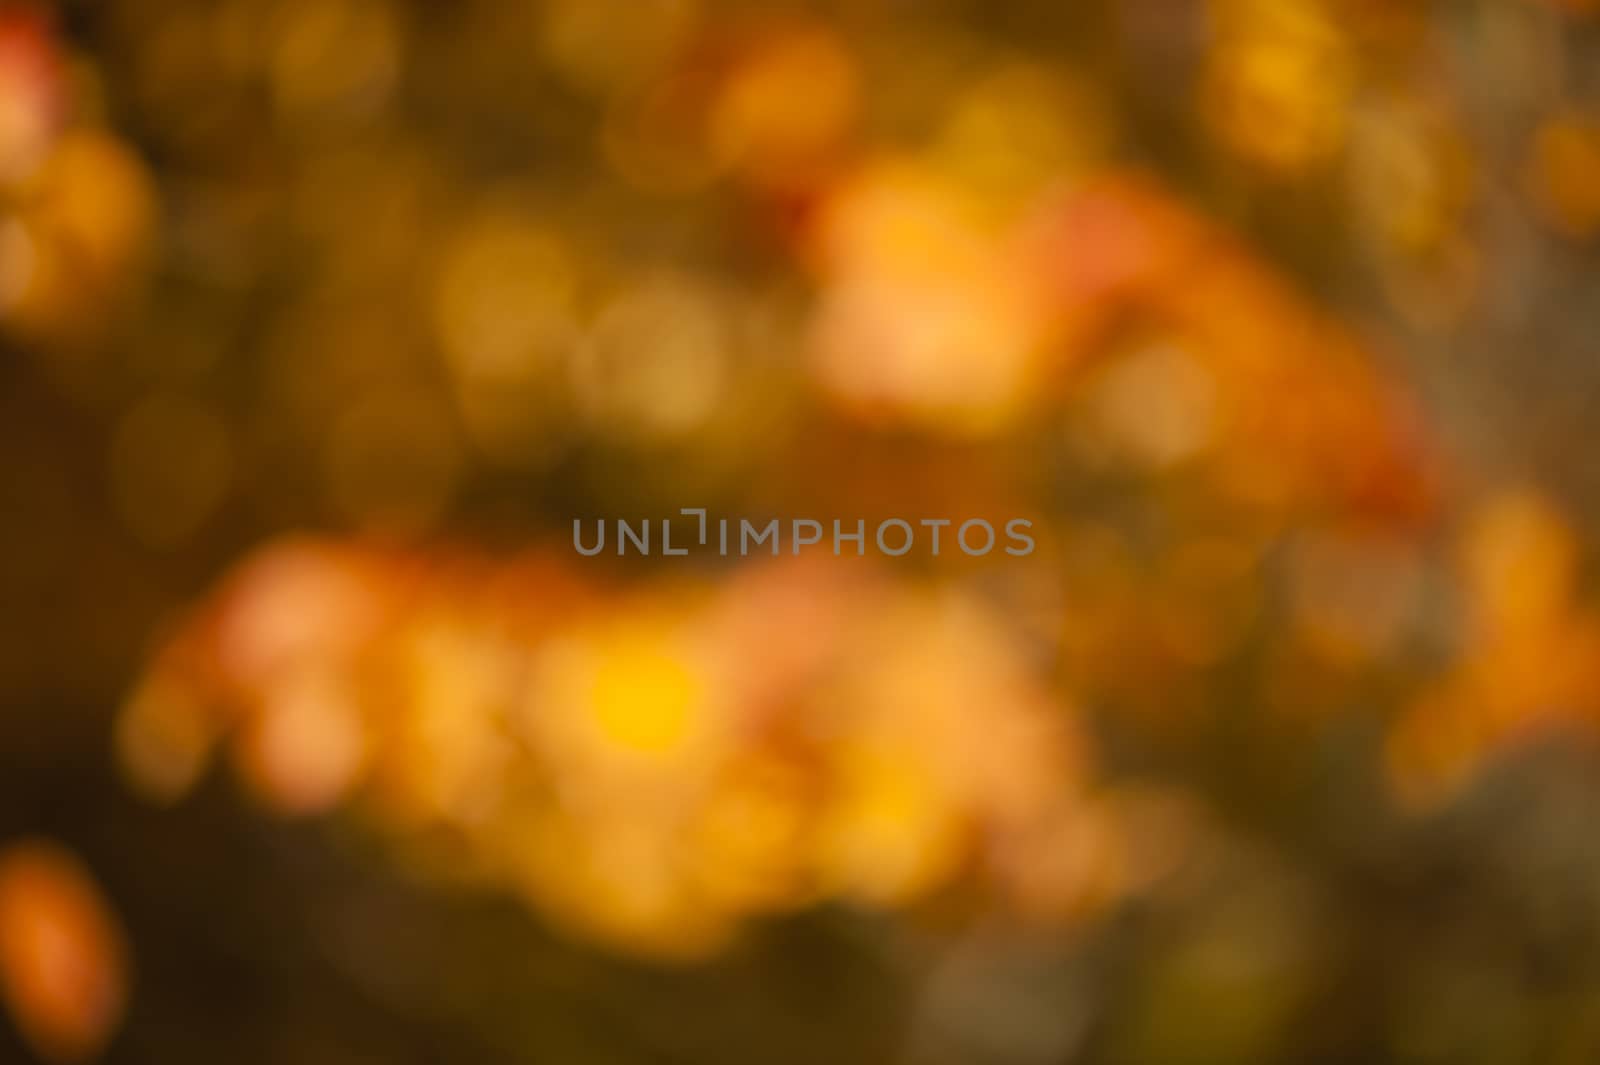 Blurred background by AlessandroZocc